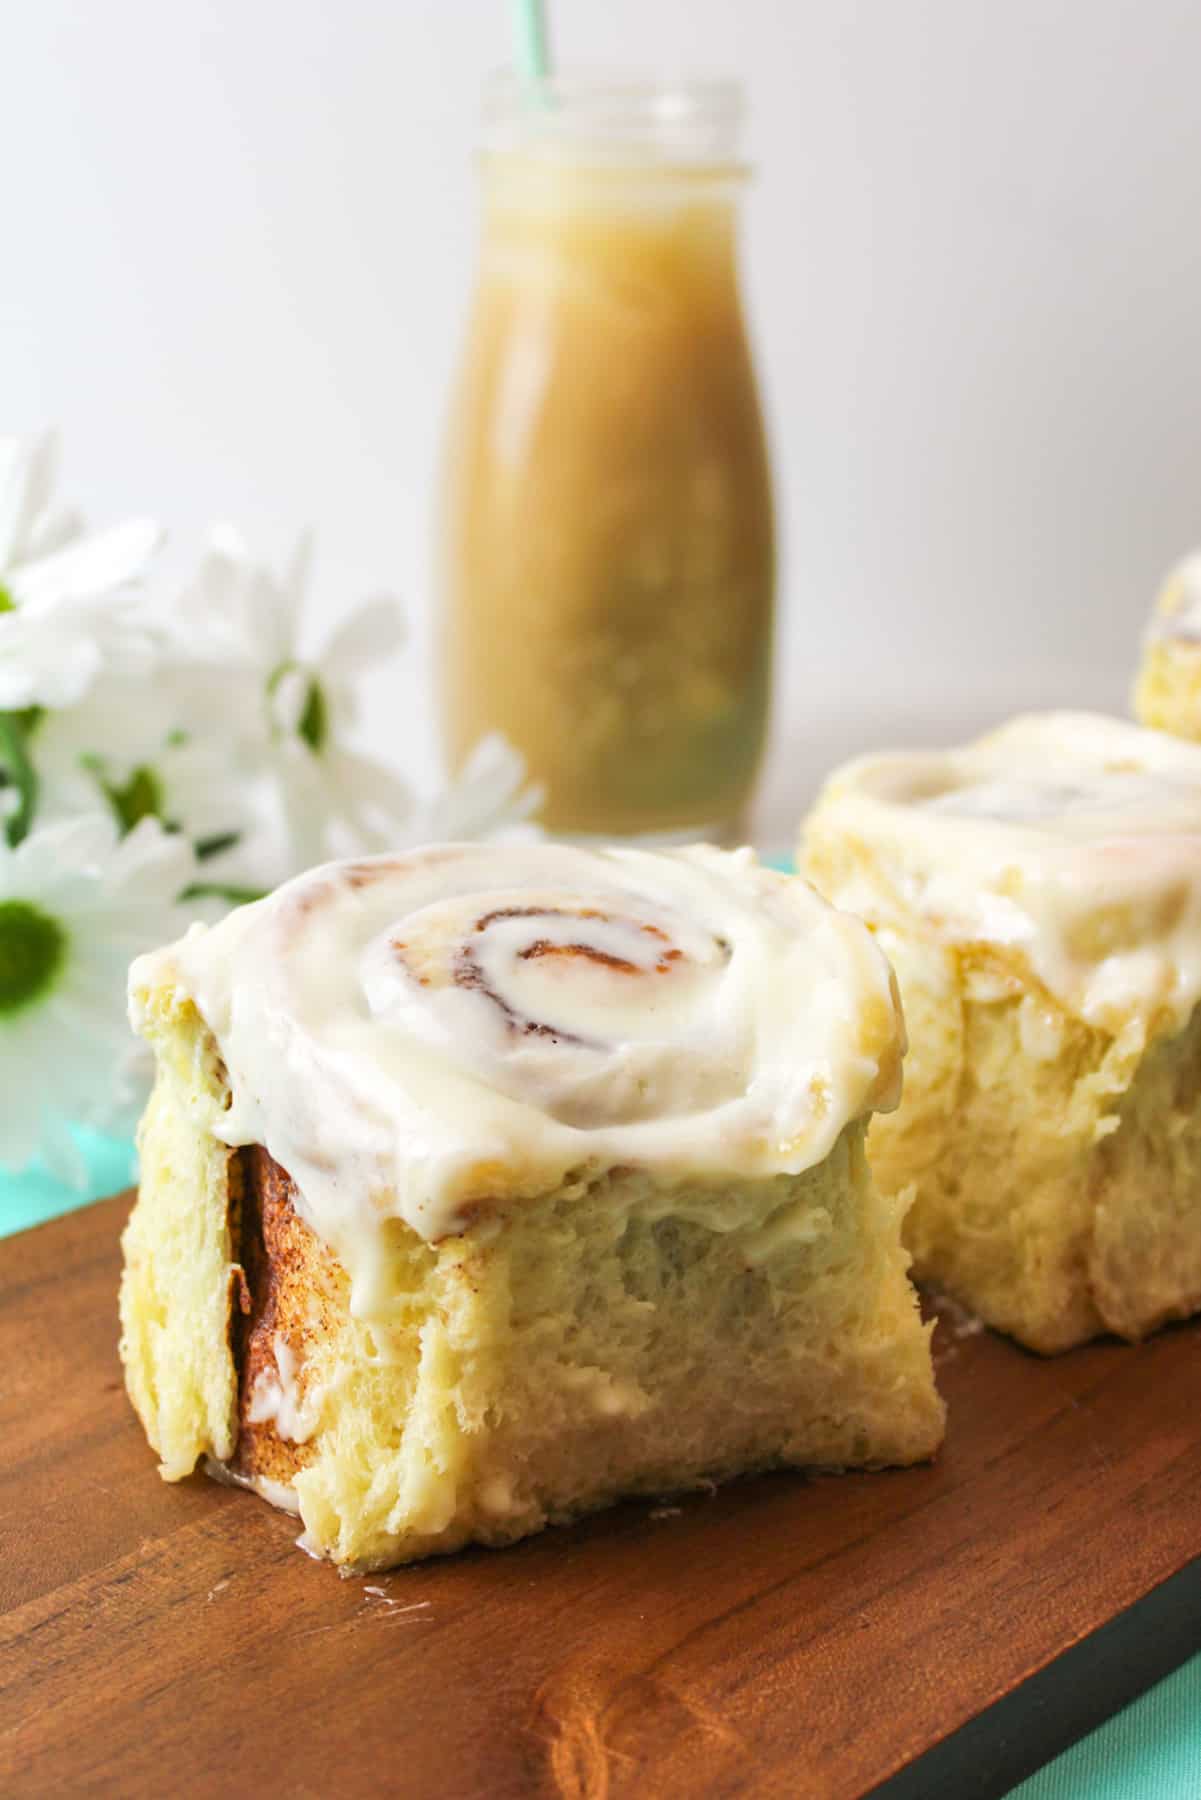 arranged cinnamon rolls on a wooden board with fresh flowers and bottle of coffee in background